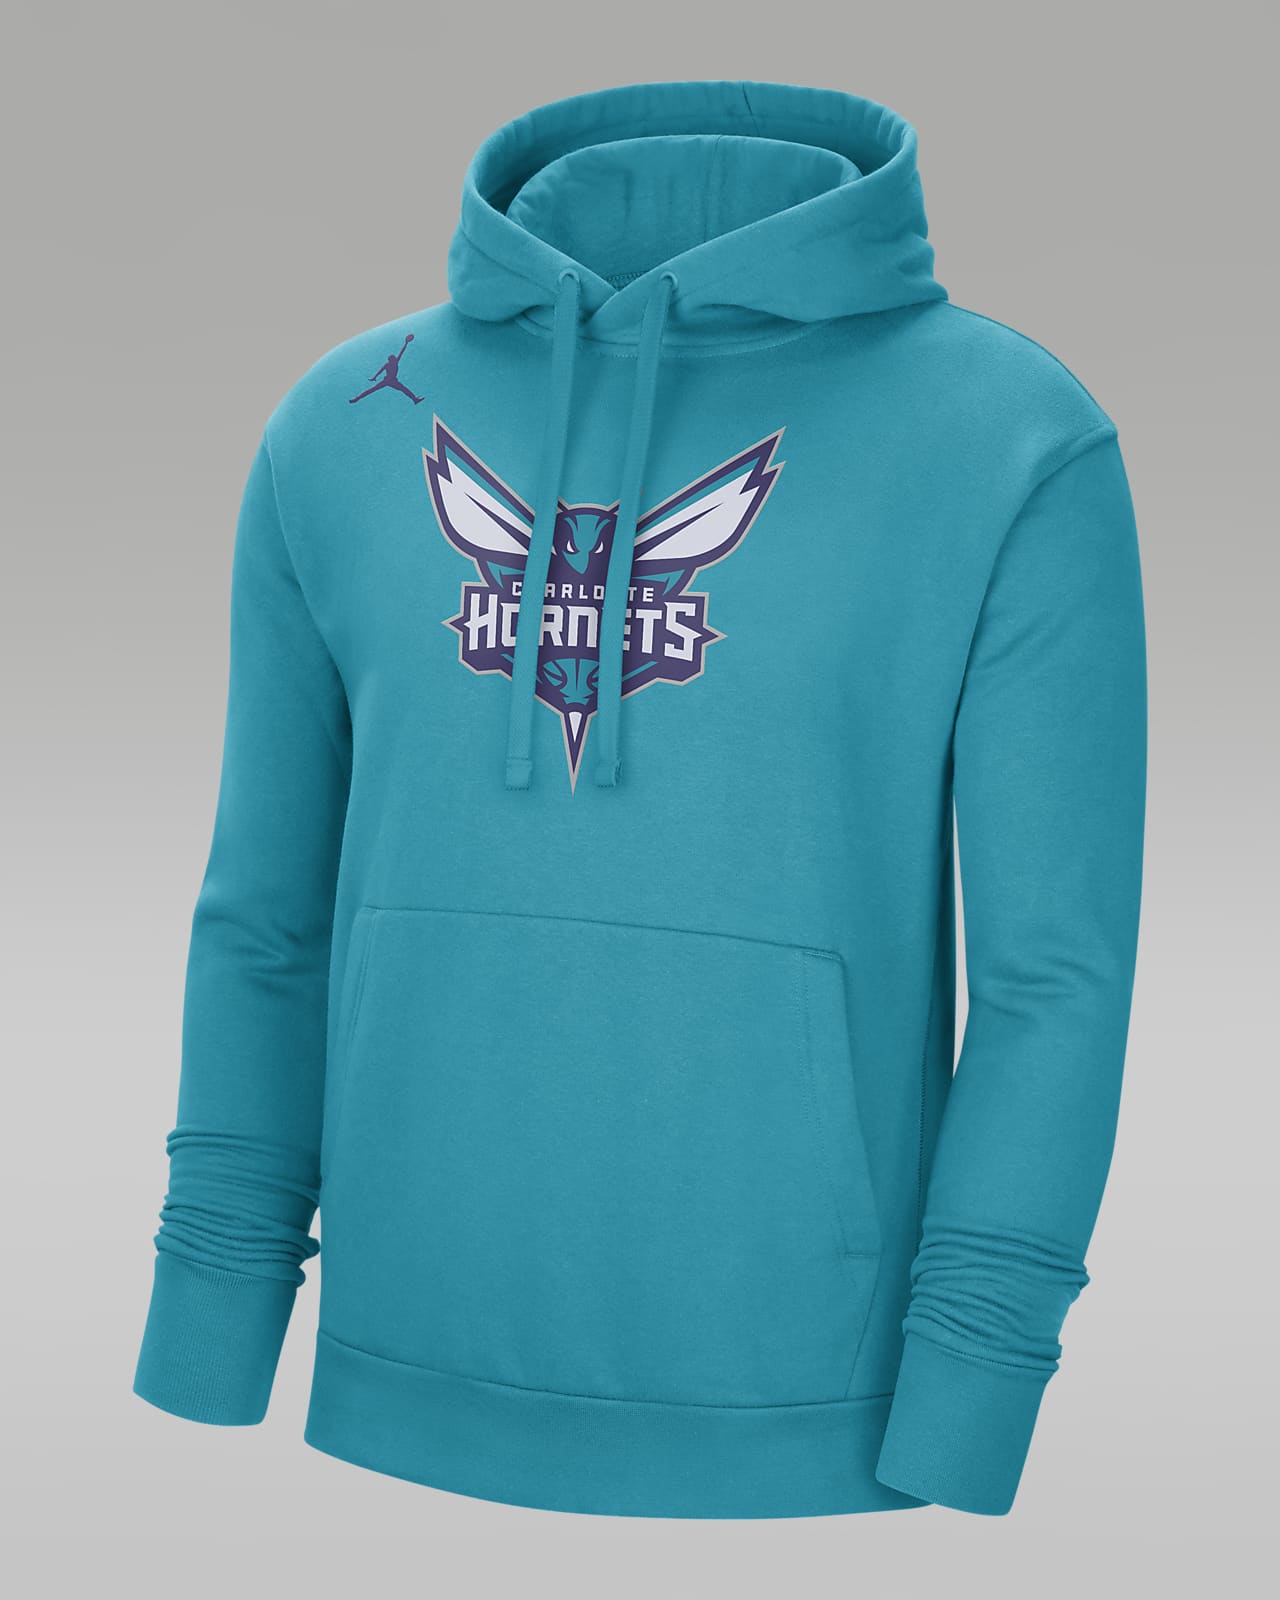 Charlotte Hornets Logo T-Shirt from Homage. | Teal | Vintage Apparel from Homage.